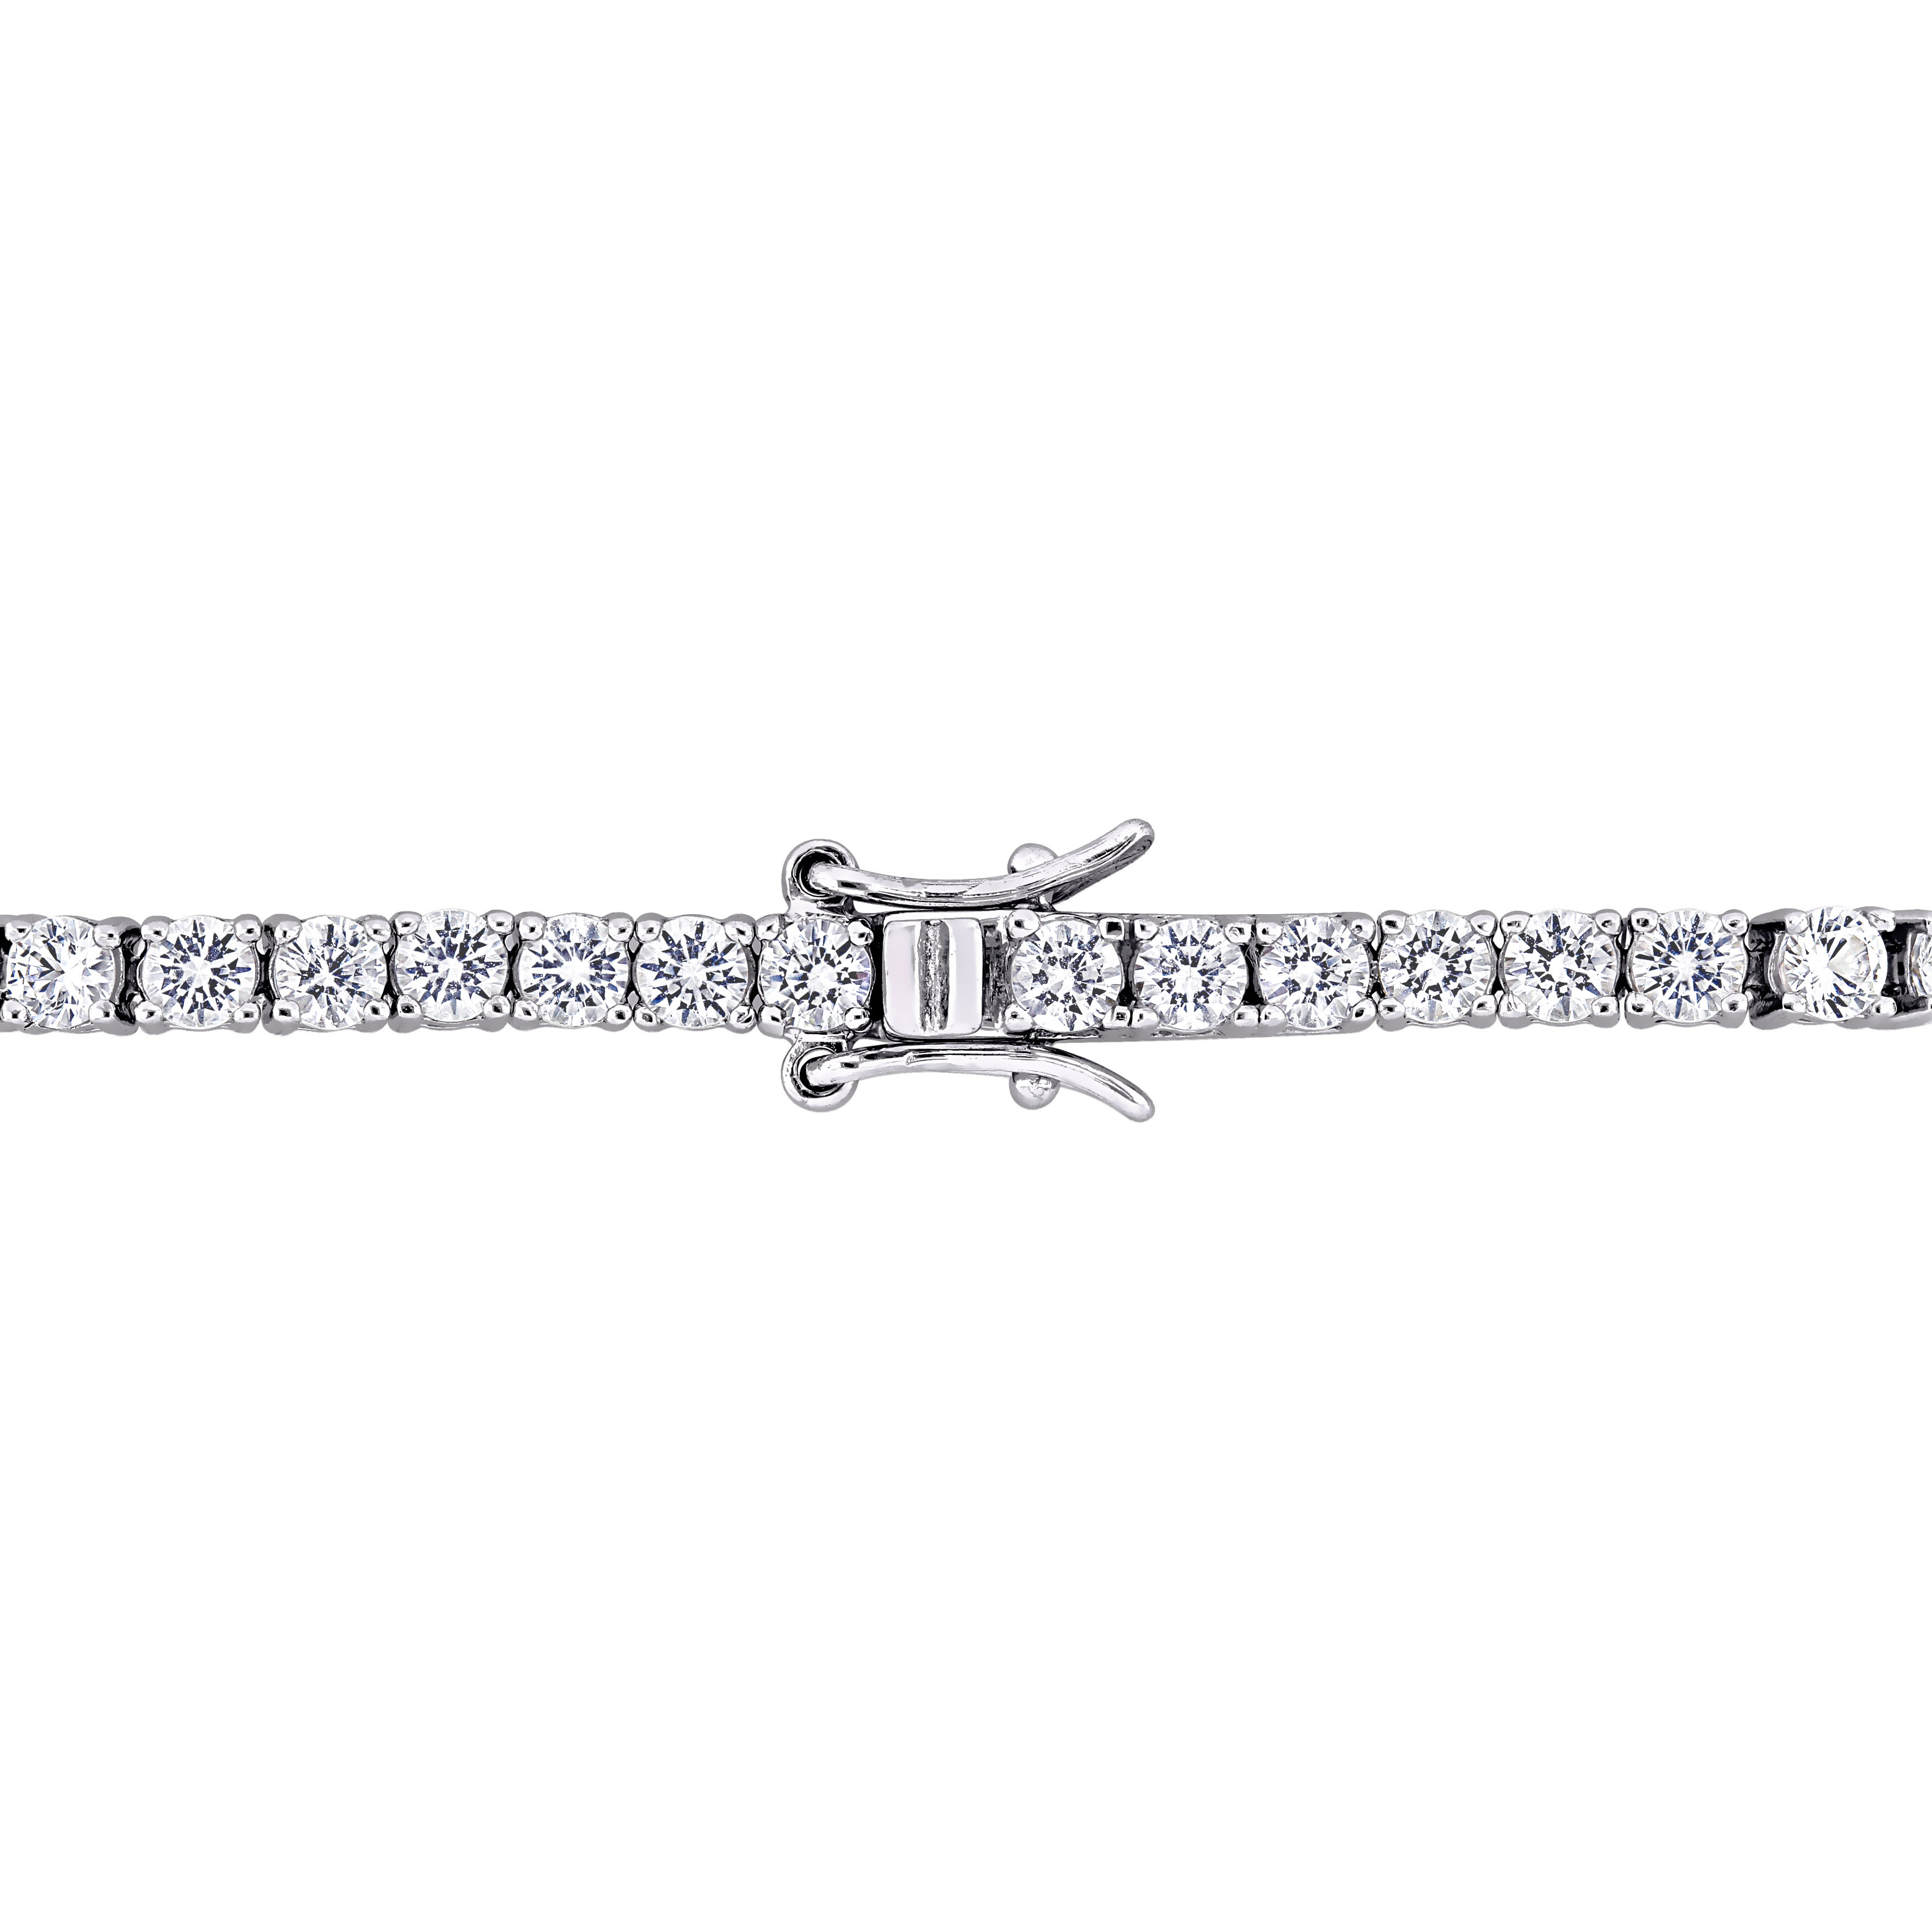 8.25 CT TGW Created White Sapphire 7 Bracelet in Sterling Silver